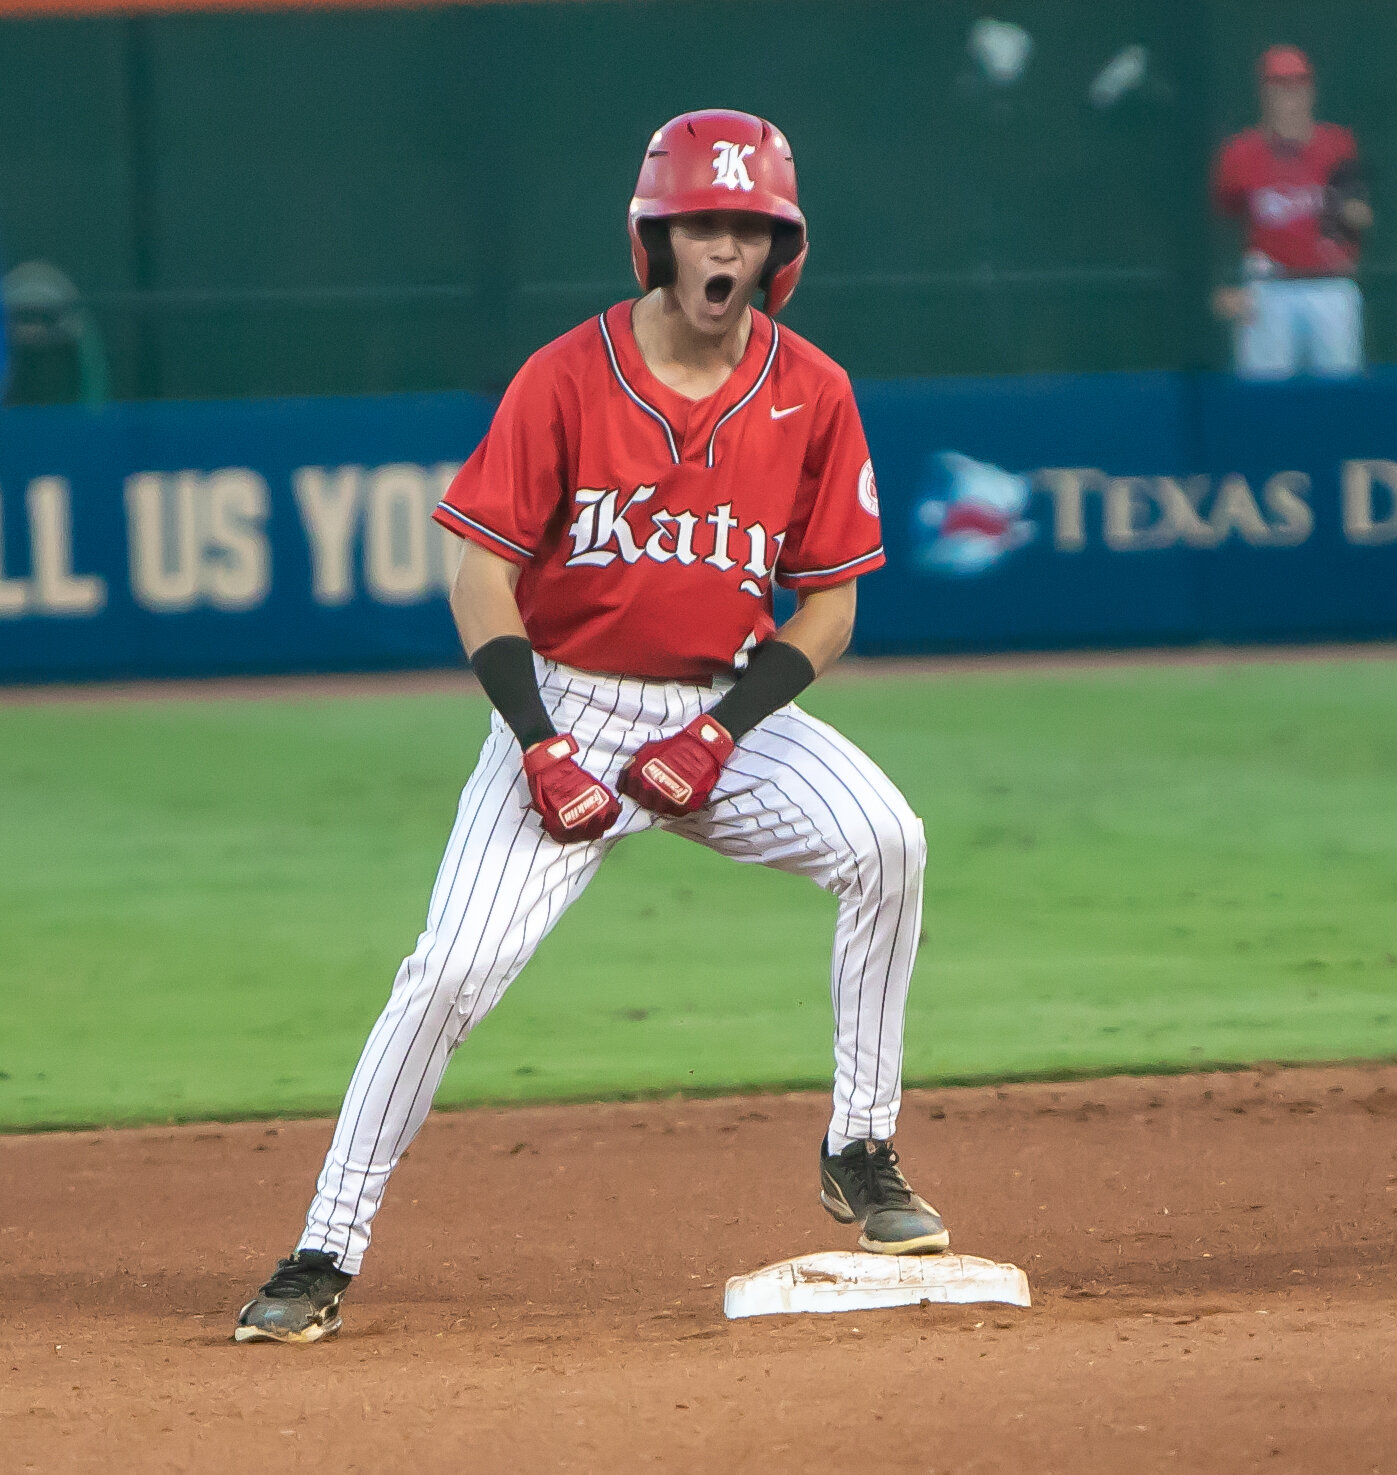 Andrew Horner celebrates after hitting a double during Friday's Regional Final between Katy and Pearland at Constellation Field in Sugar Land.